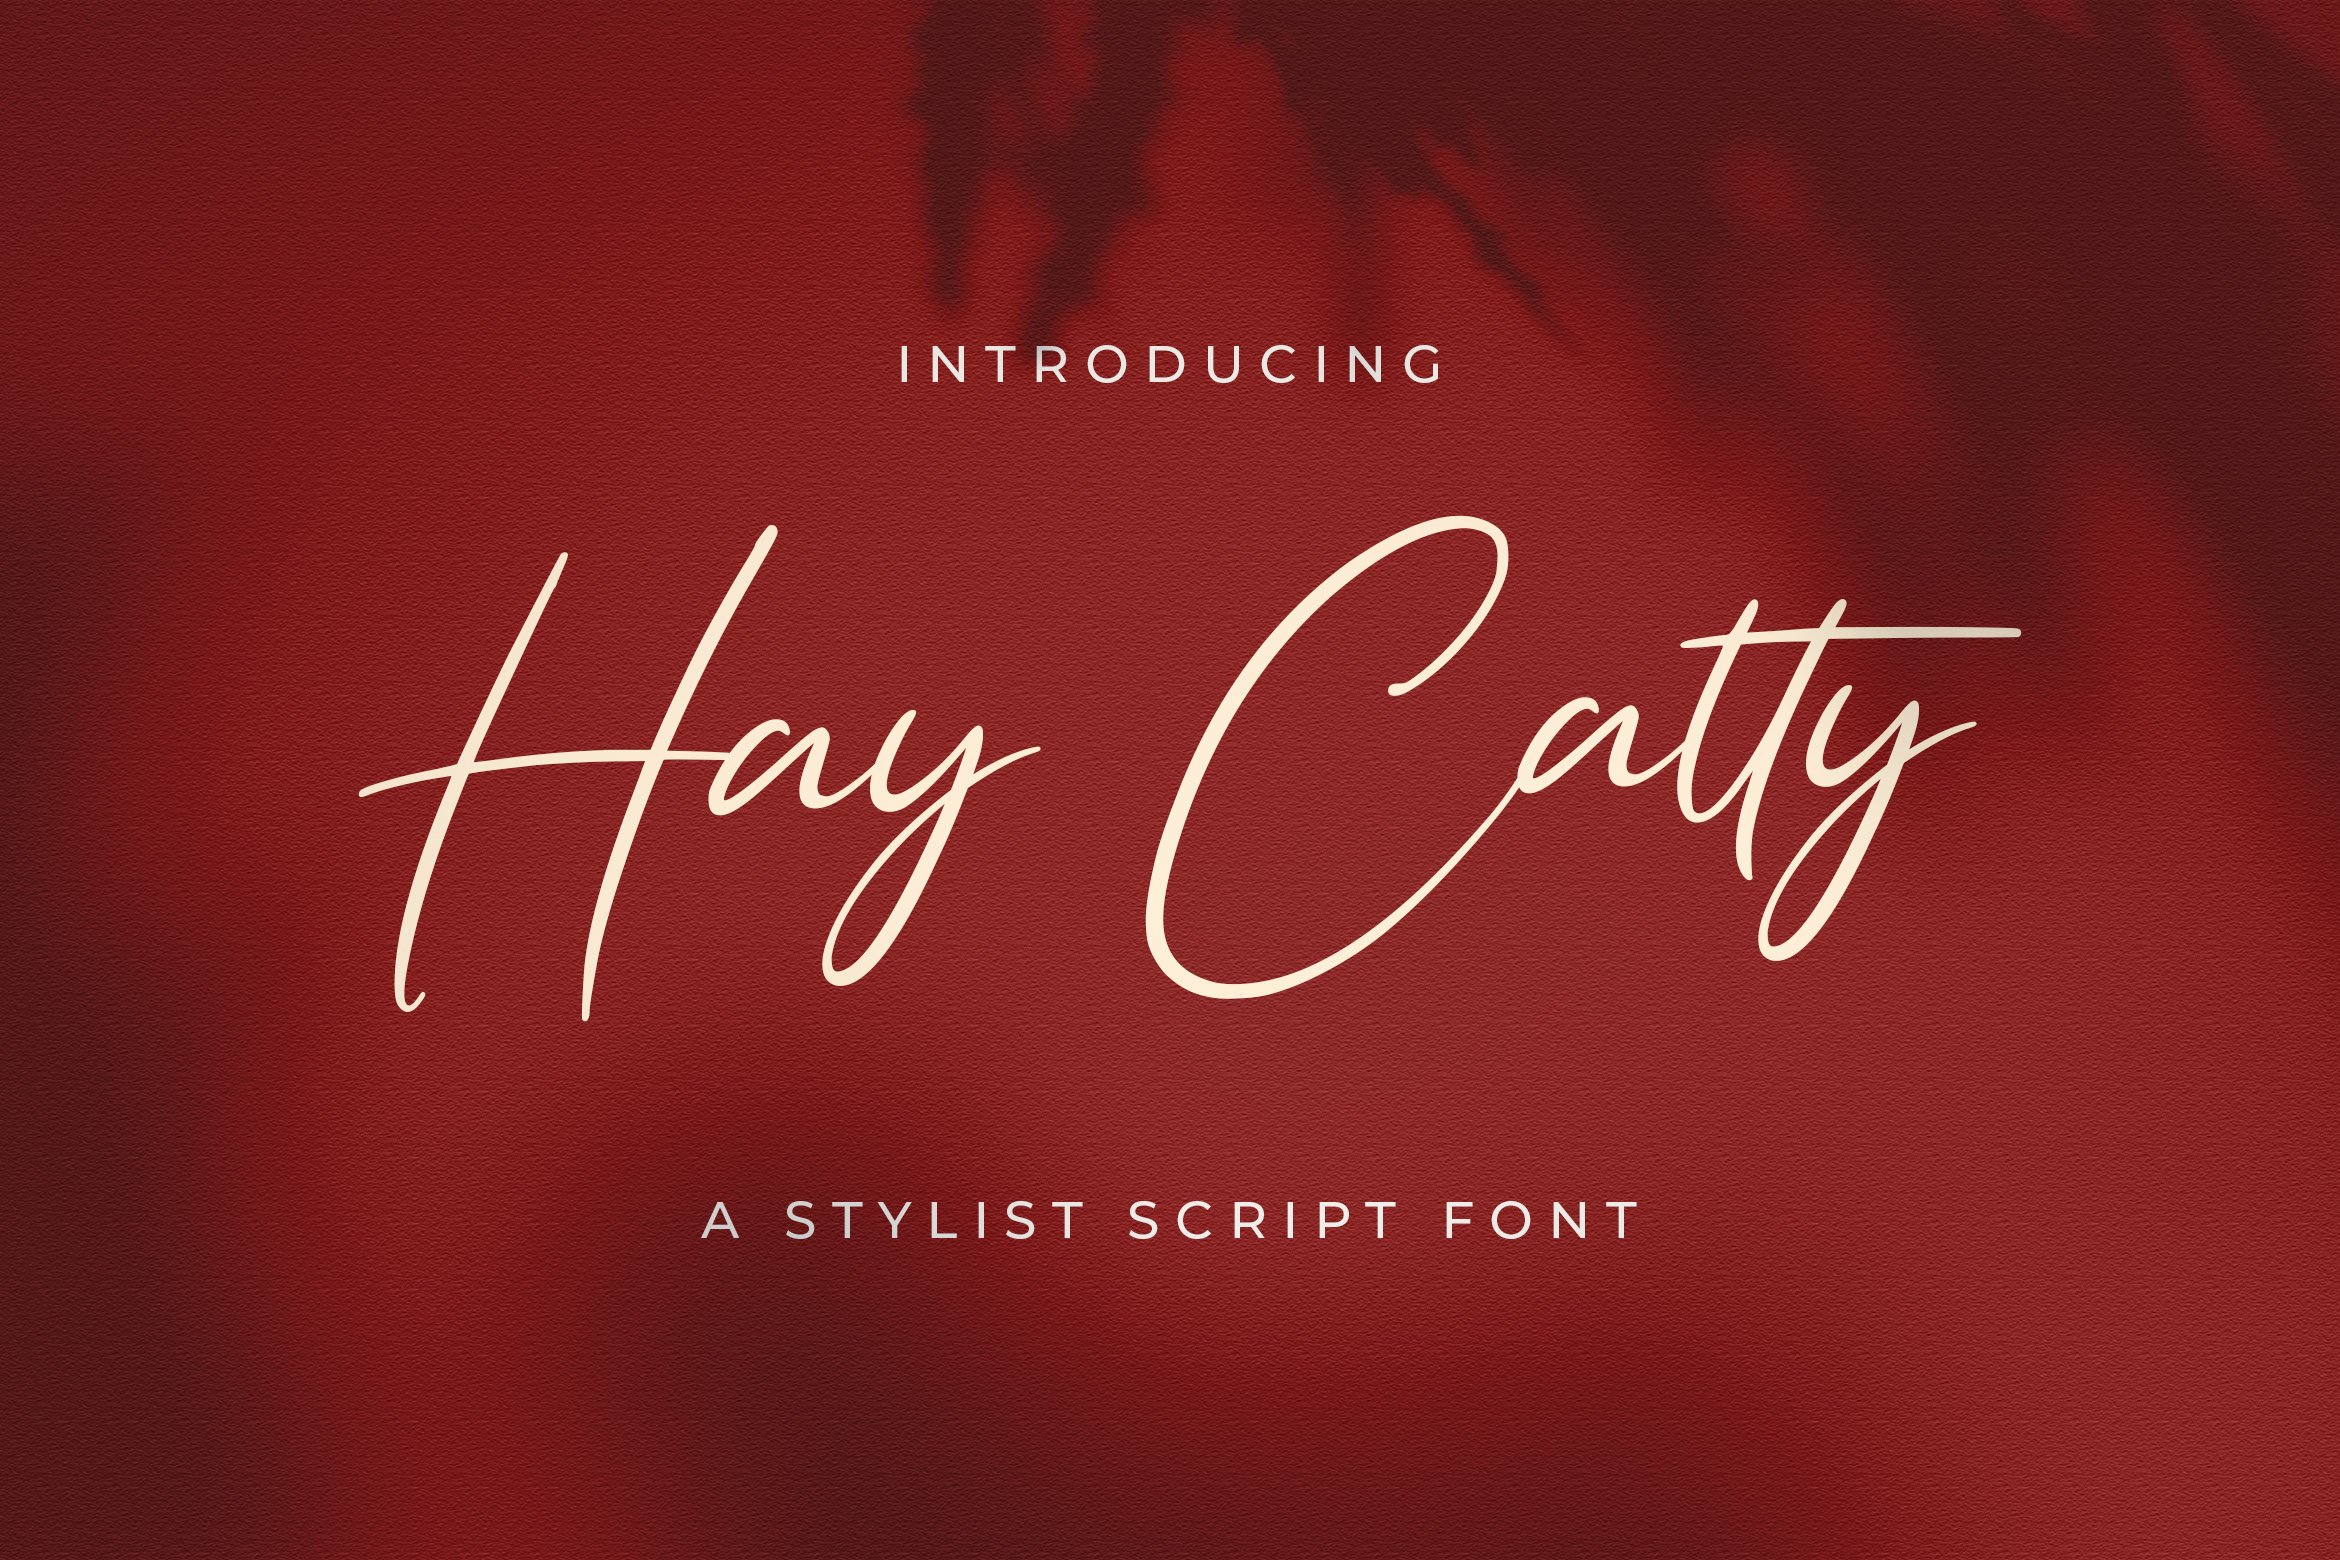 Hay Catty - Handwritten Font cover image.